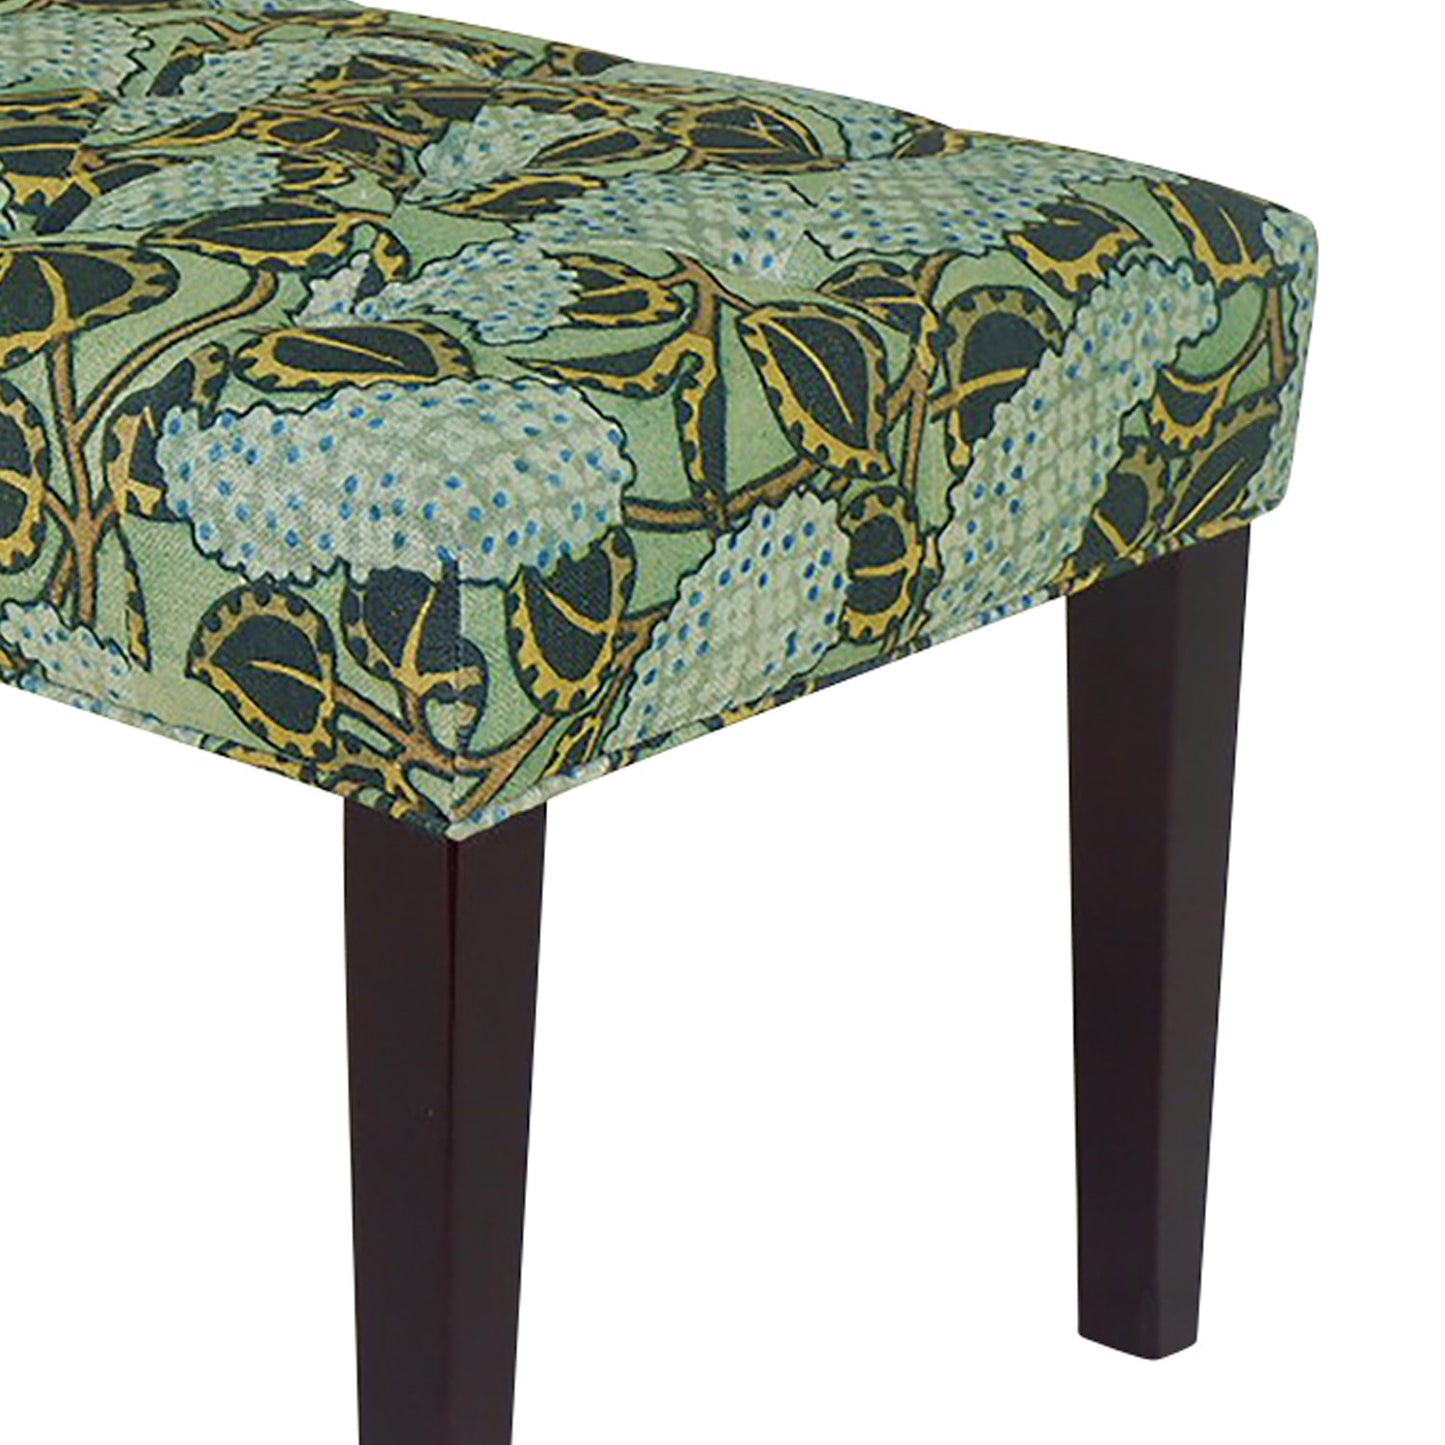 42" Green and Blue Tufted Floral Upholstered Bench